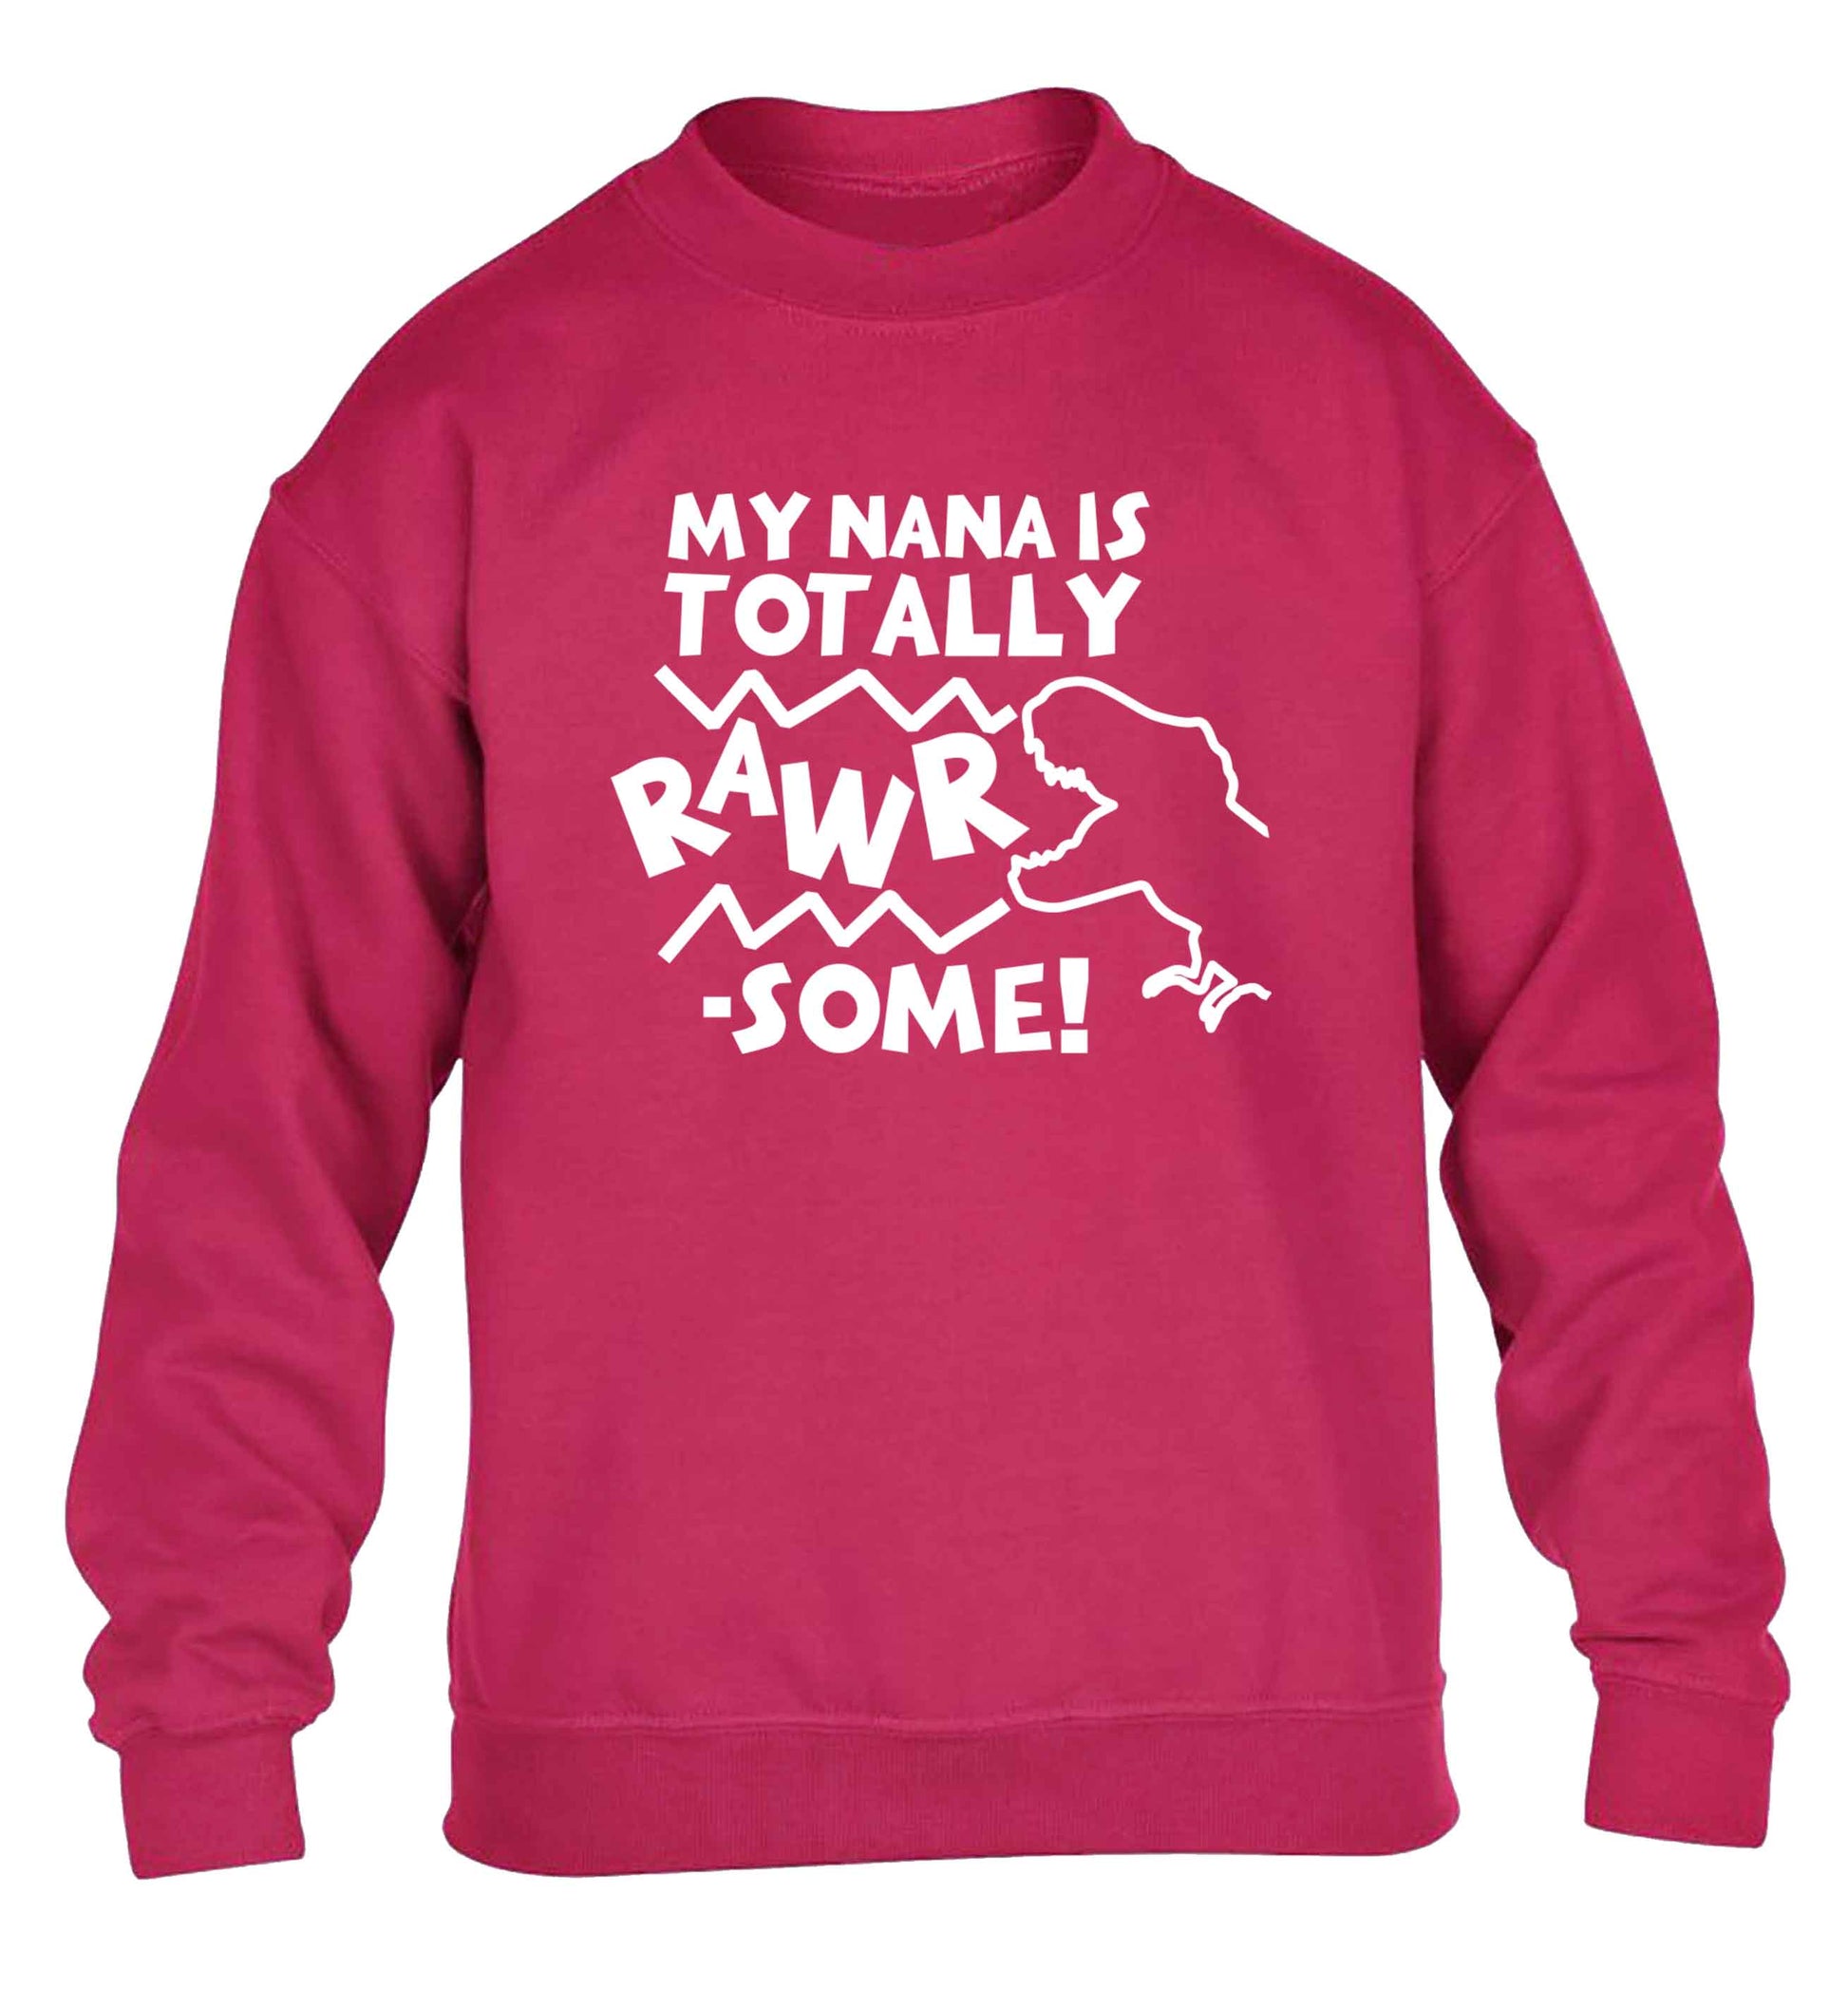 My nana is totally rawrsome children's pink sweater 12-13 Years